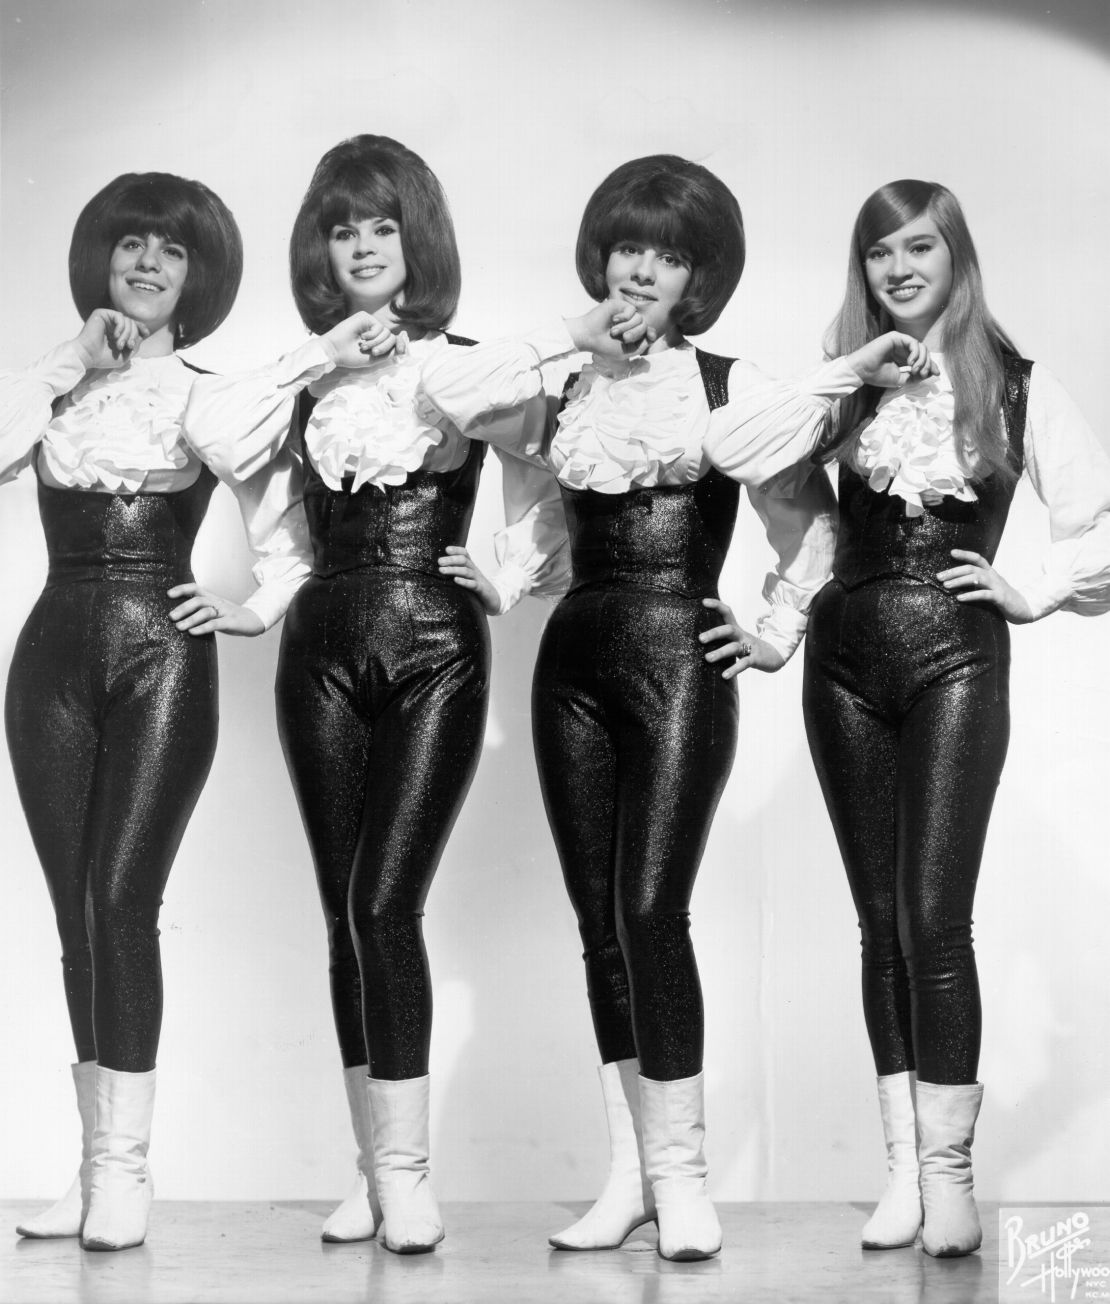 From left, Mary Ann Ganser, Betty Weiss, Marge Ganser and Mary Weiss of The Shangri-Las pose for a portrait Circa 1964 in New York City.